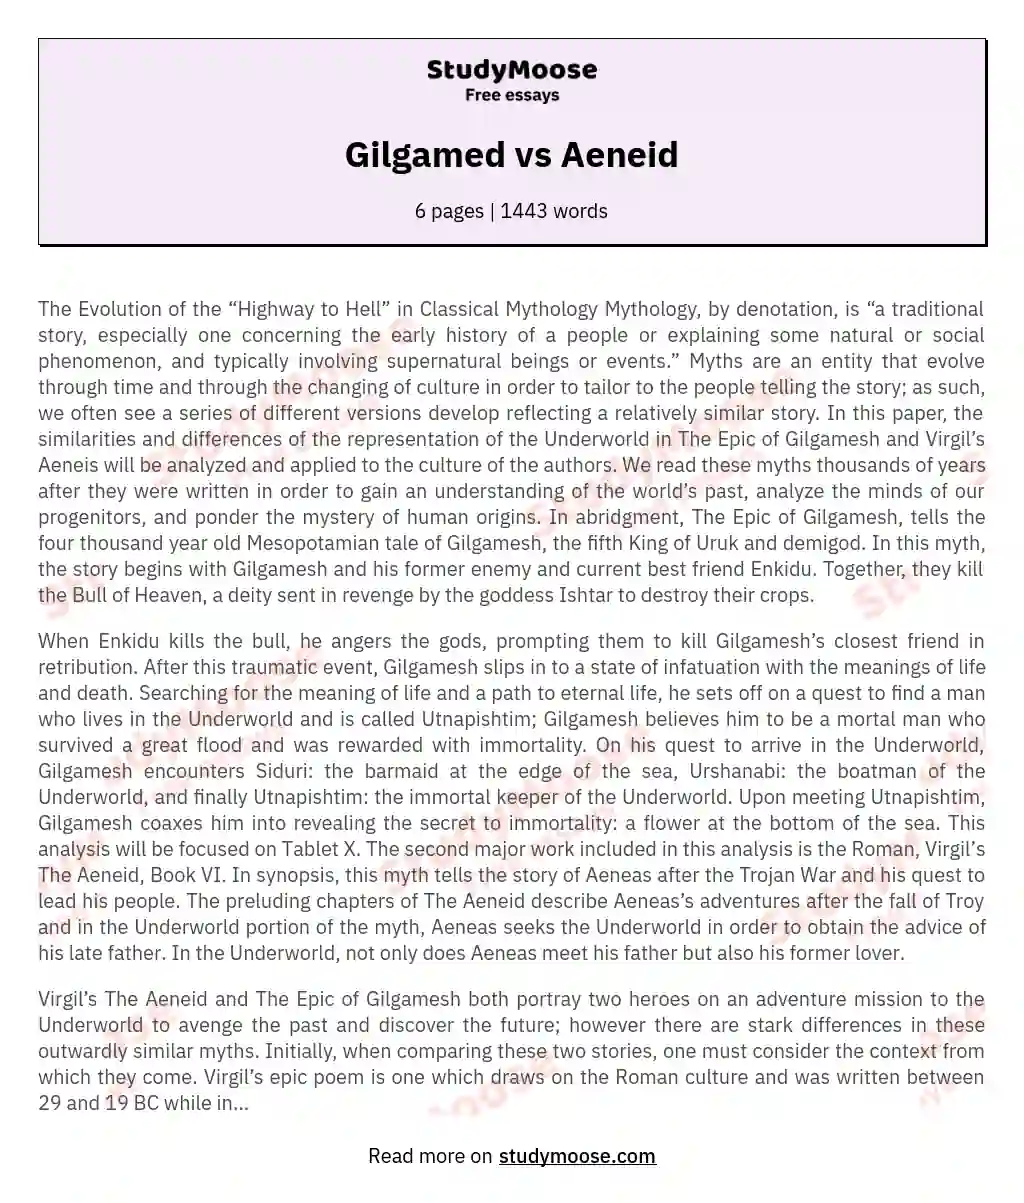 Journeys to the Underworld: A Comparative Analysis of Gilgamesh and Aeneas essay